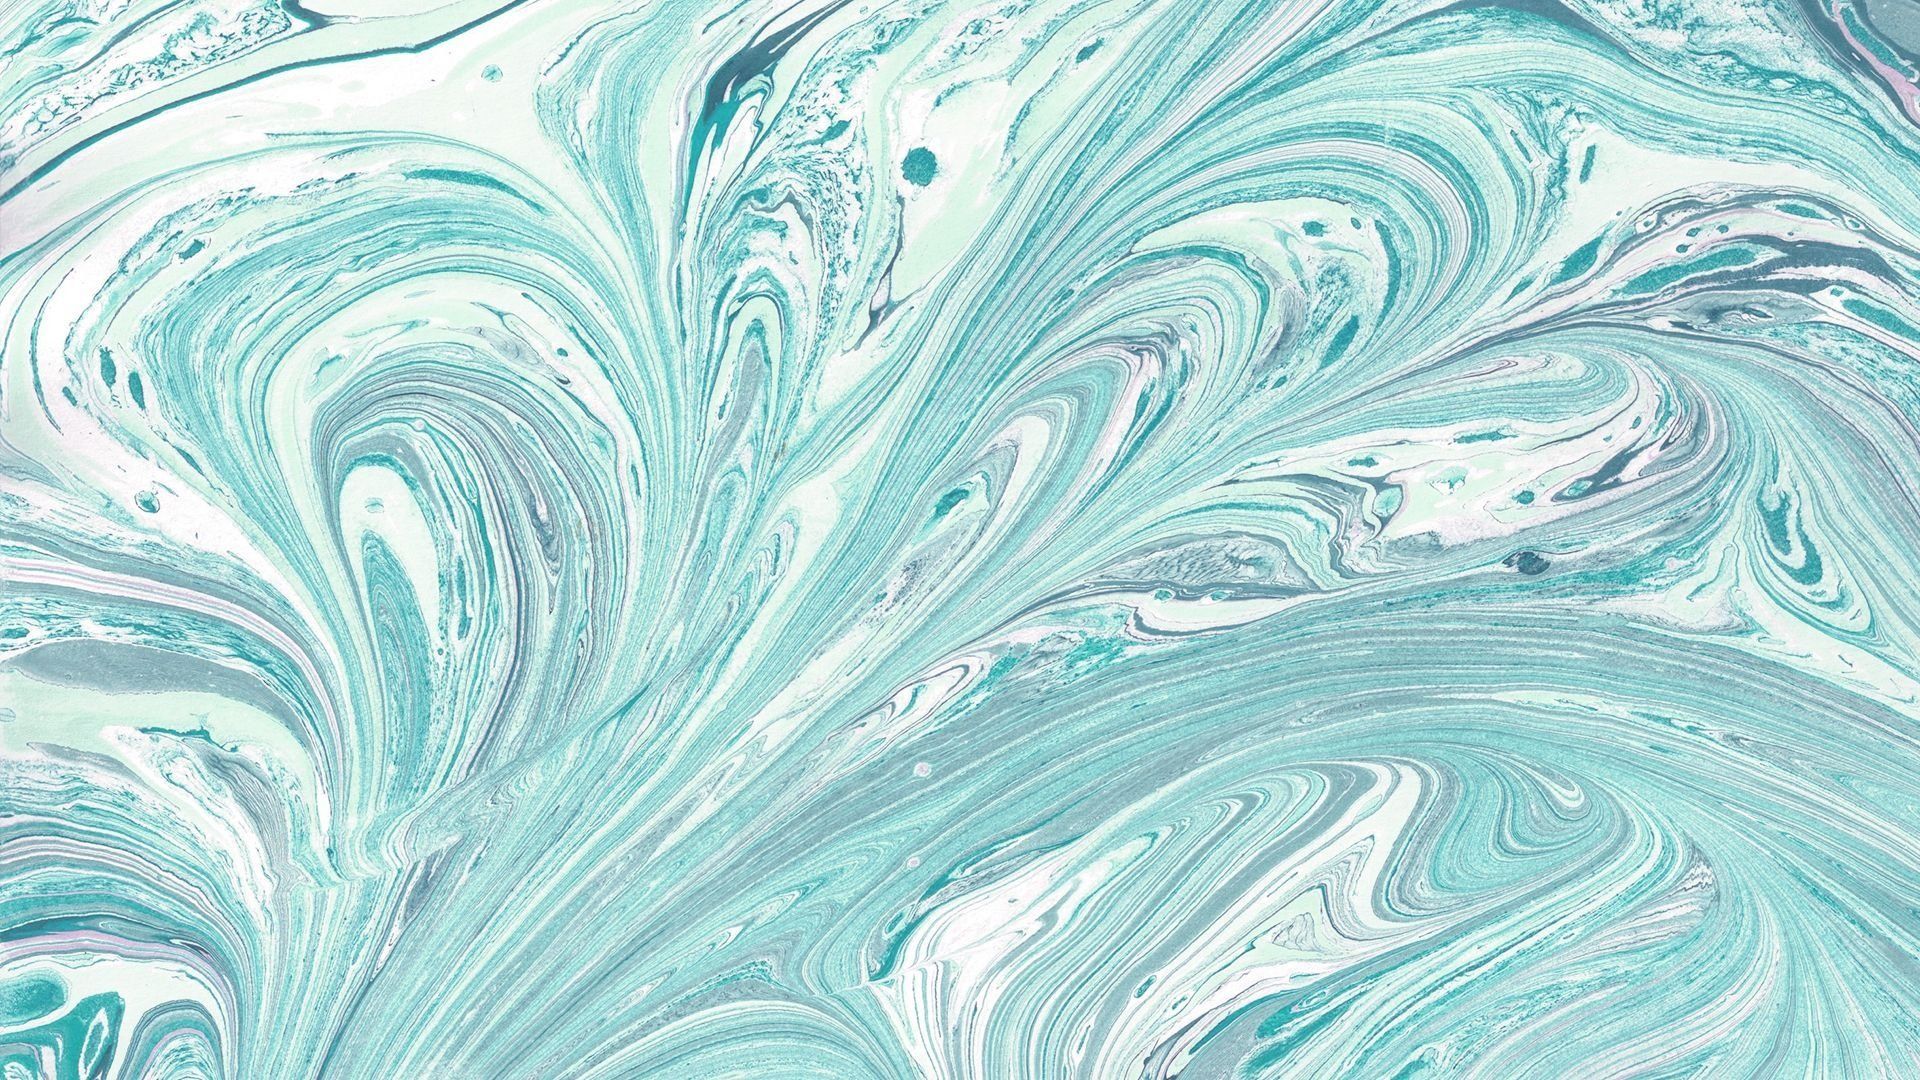 A close up of an abstract marble pattern - Turquoise, teal, marble, blue